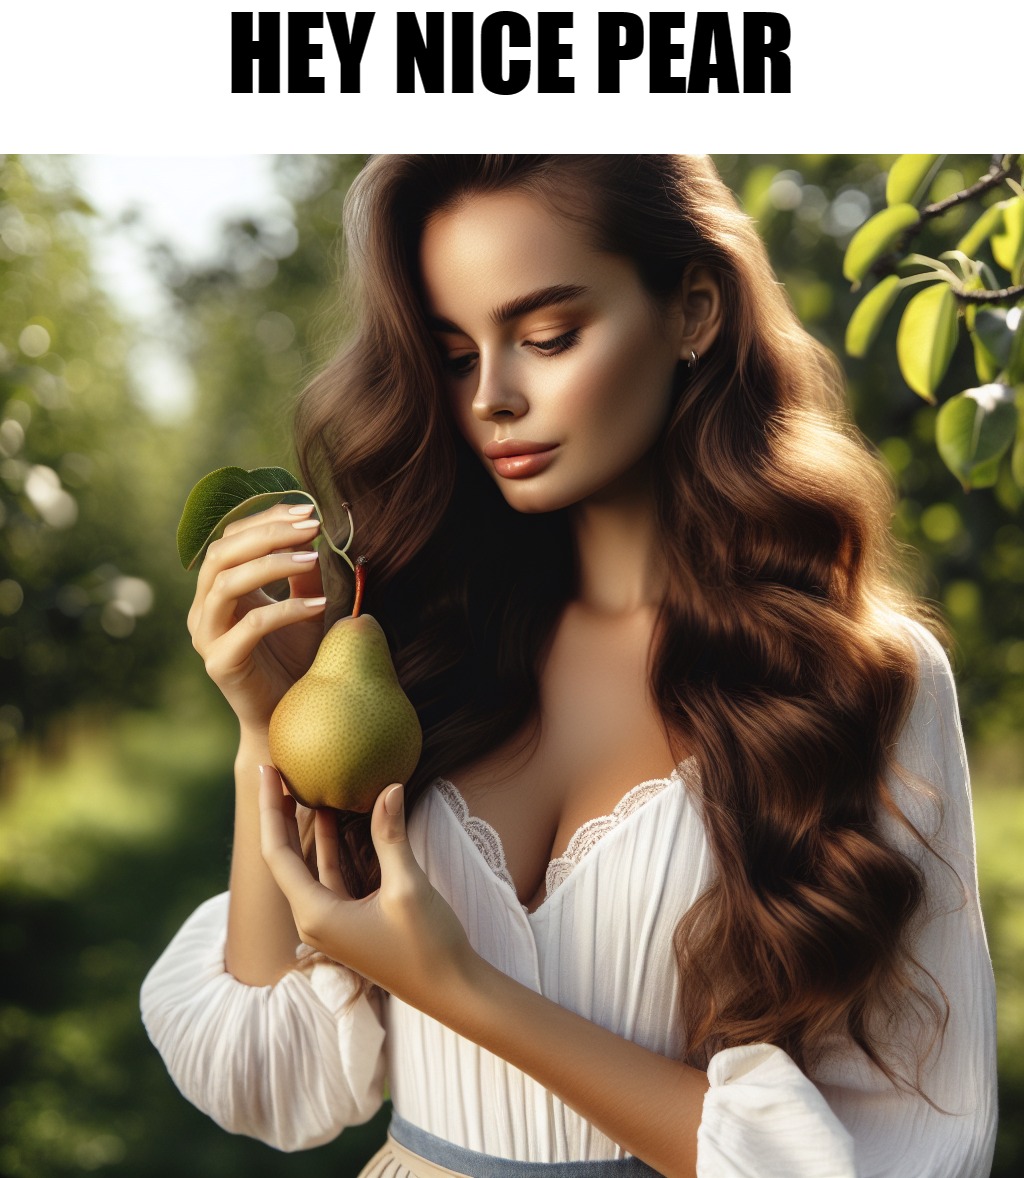 nice pear | HEY NICE PEAR | image tagged in pear,kewlew | made w/ Imgflip meme maker